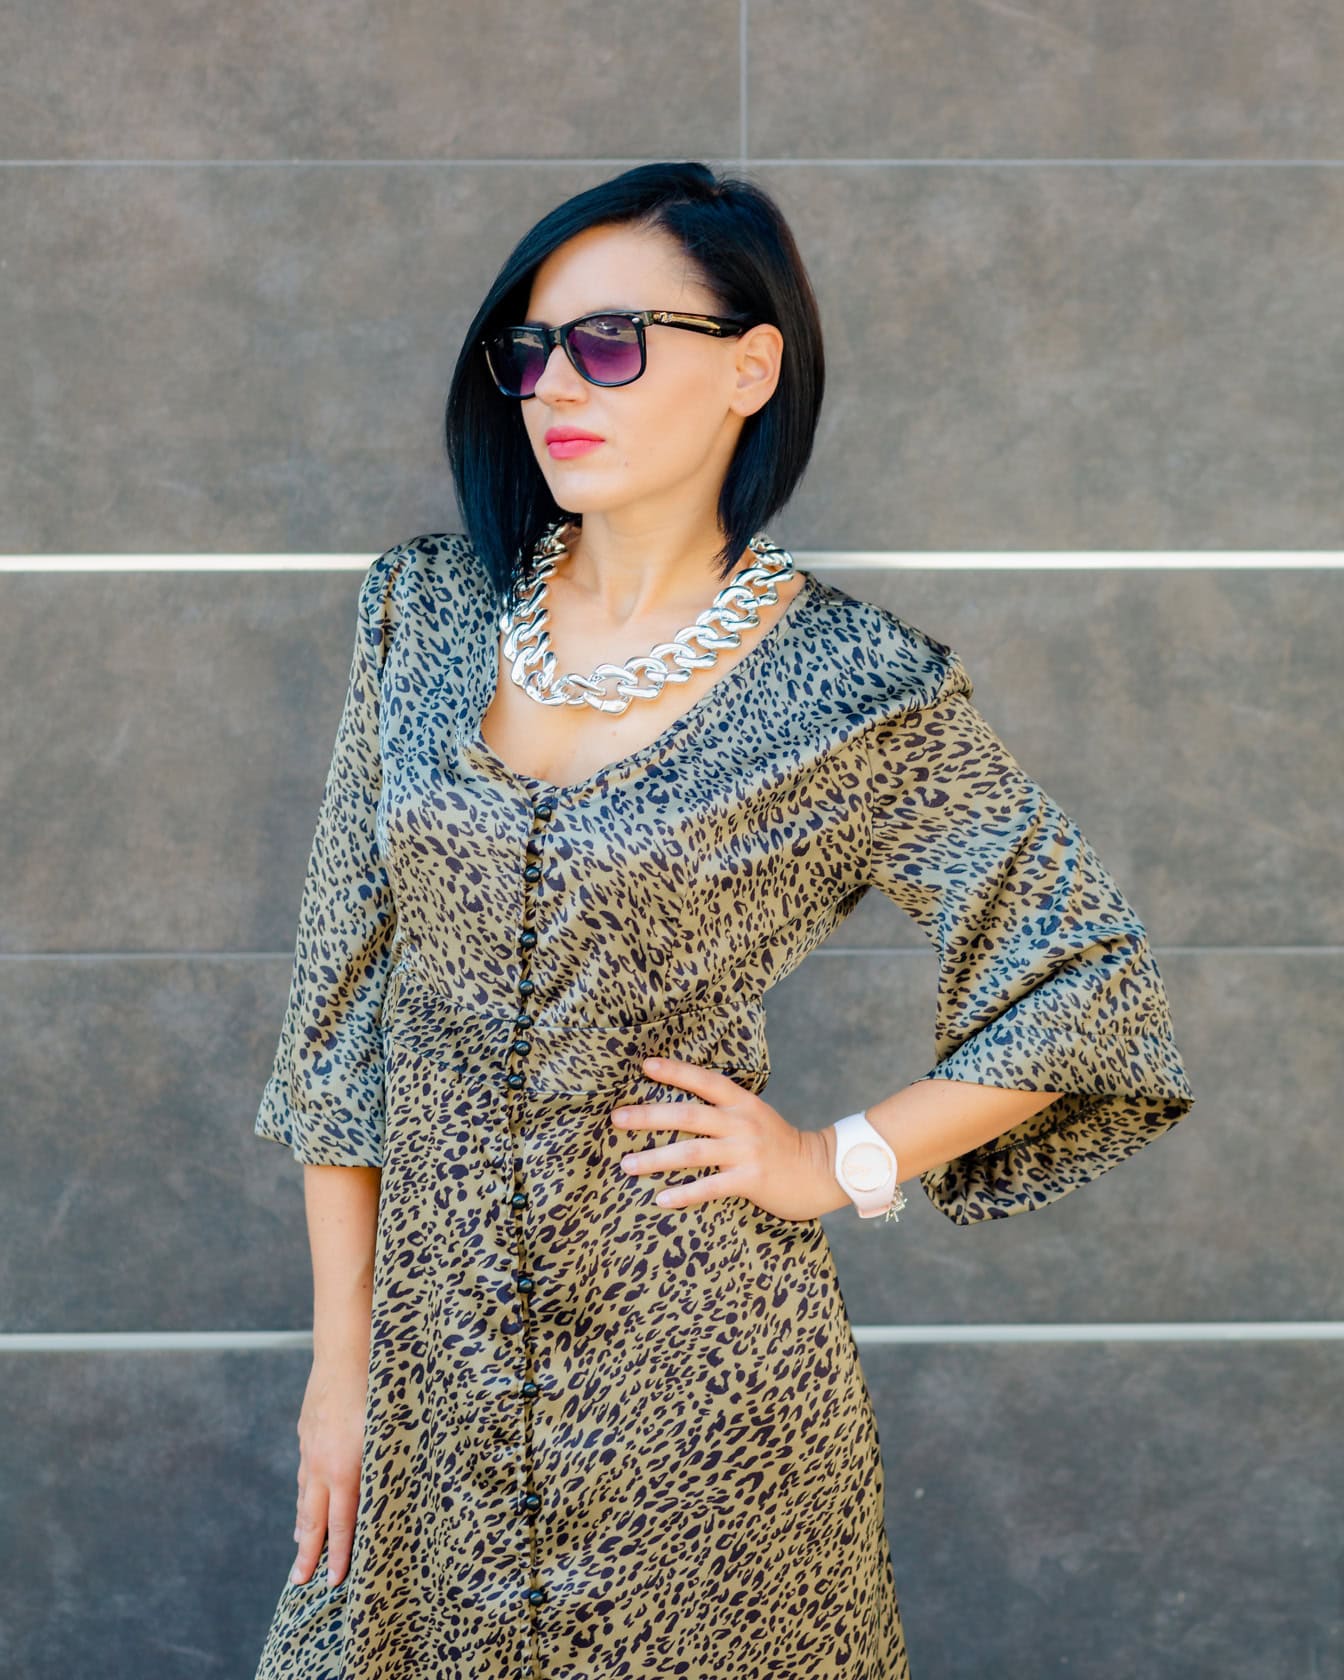 Woman posing while wearing a leopard print dress and sunglasses